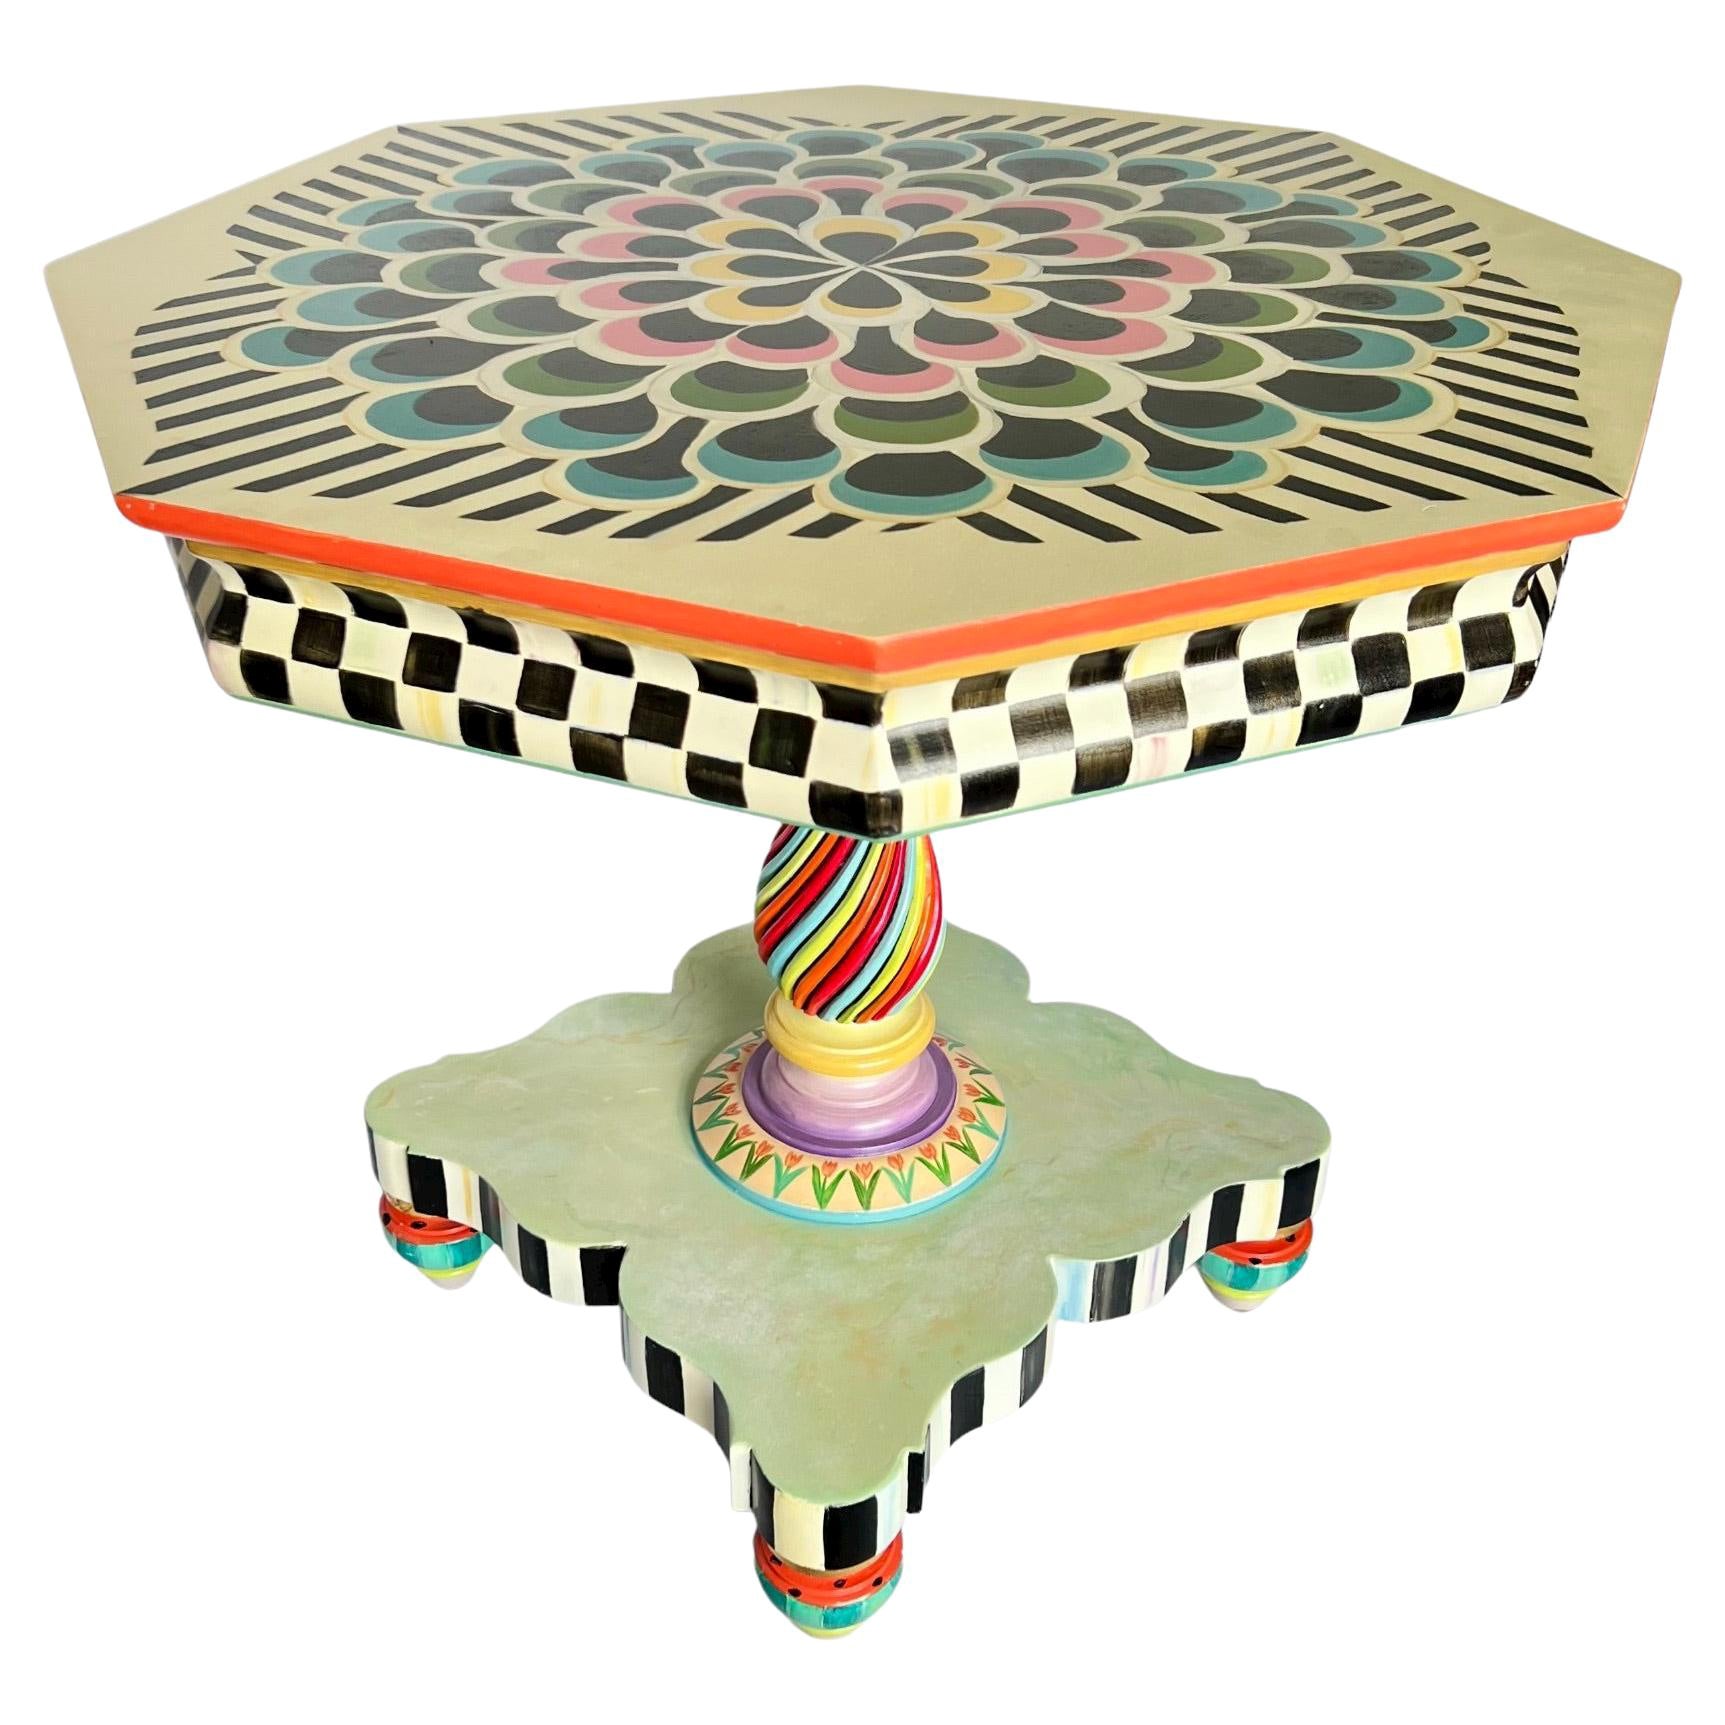 Zero Calorie Donut Octagon Pedestal Table in the Style of MacKenzie-Childs For Sale